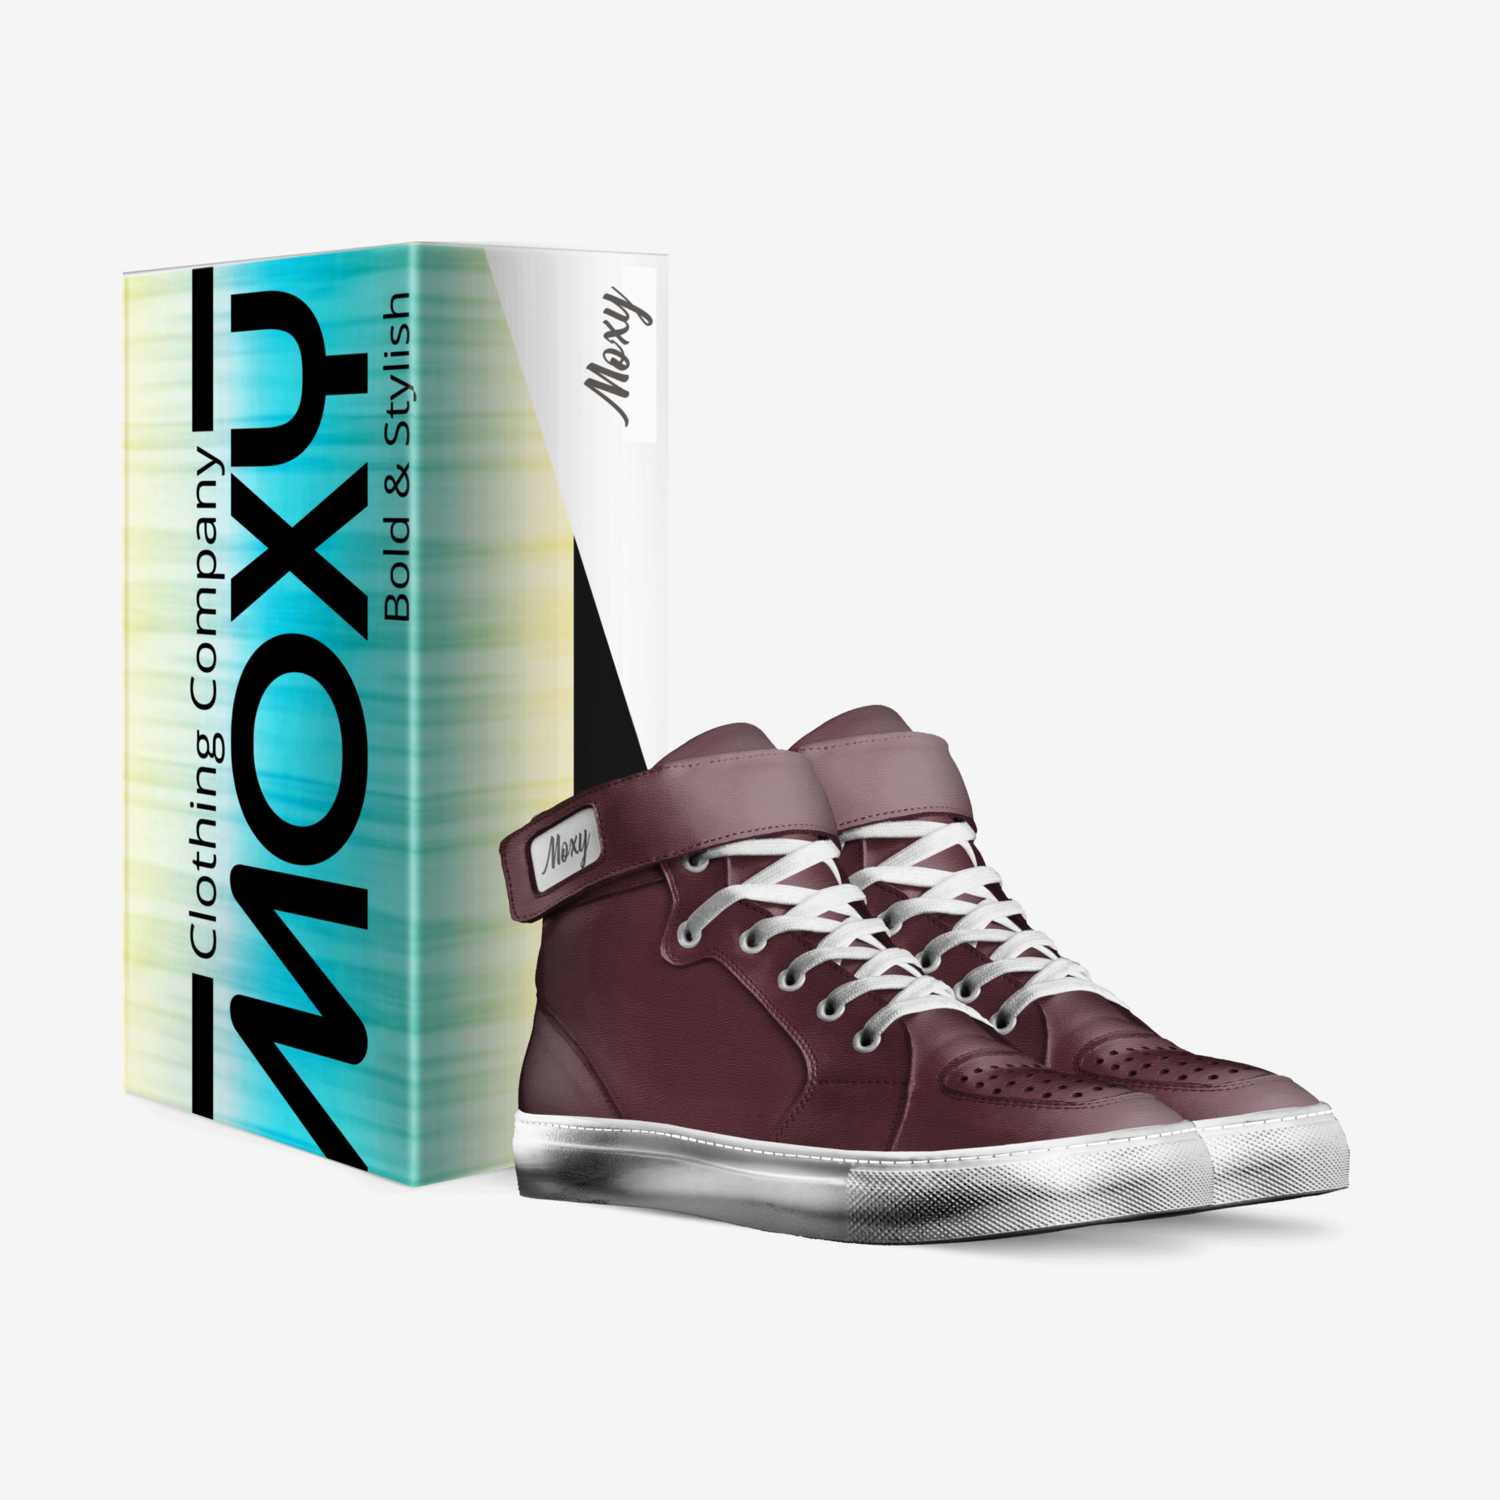 Elites wine custom made in Italy shoes by Moxy Clothing Co. | Box view